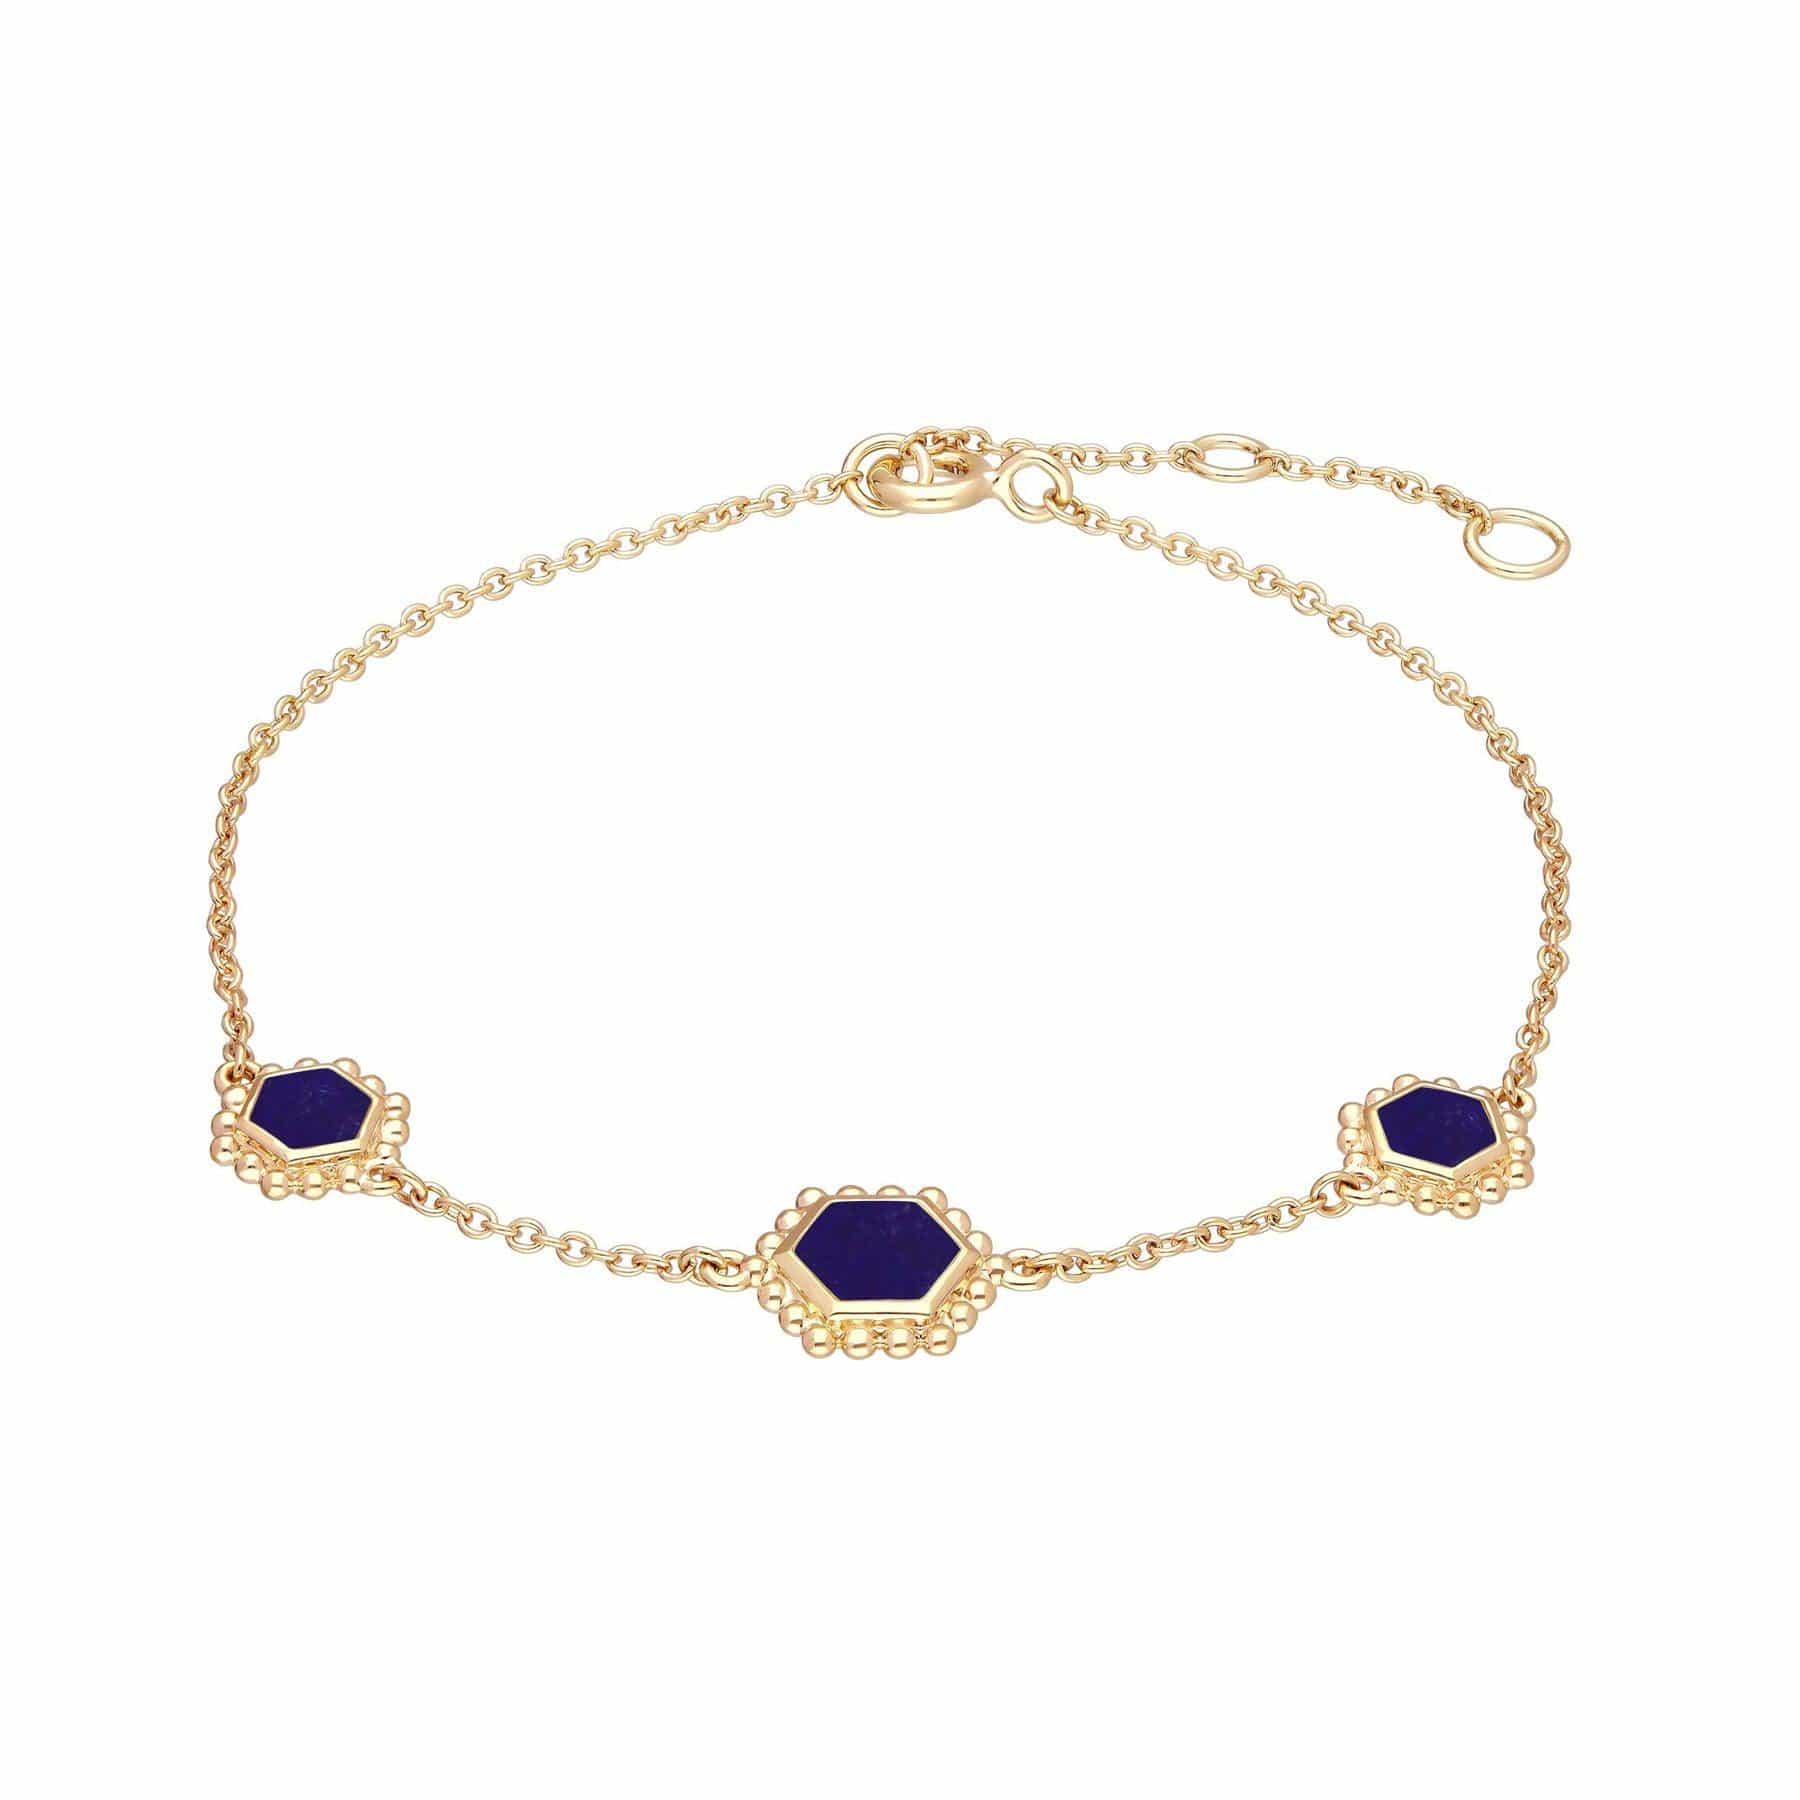 Lapis Lazuli Flat Slice Hex Chain Bracelet in Gold Plated Sterling Silver